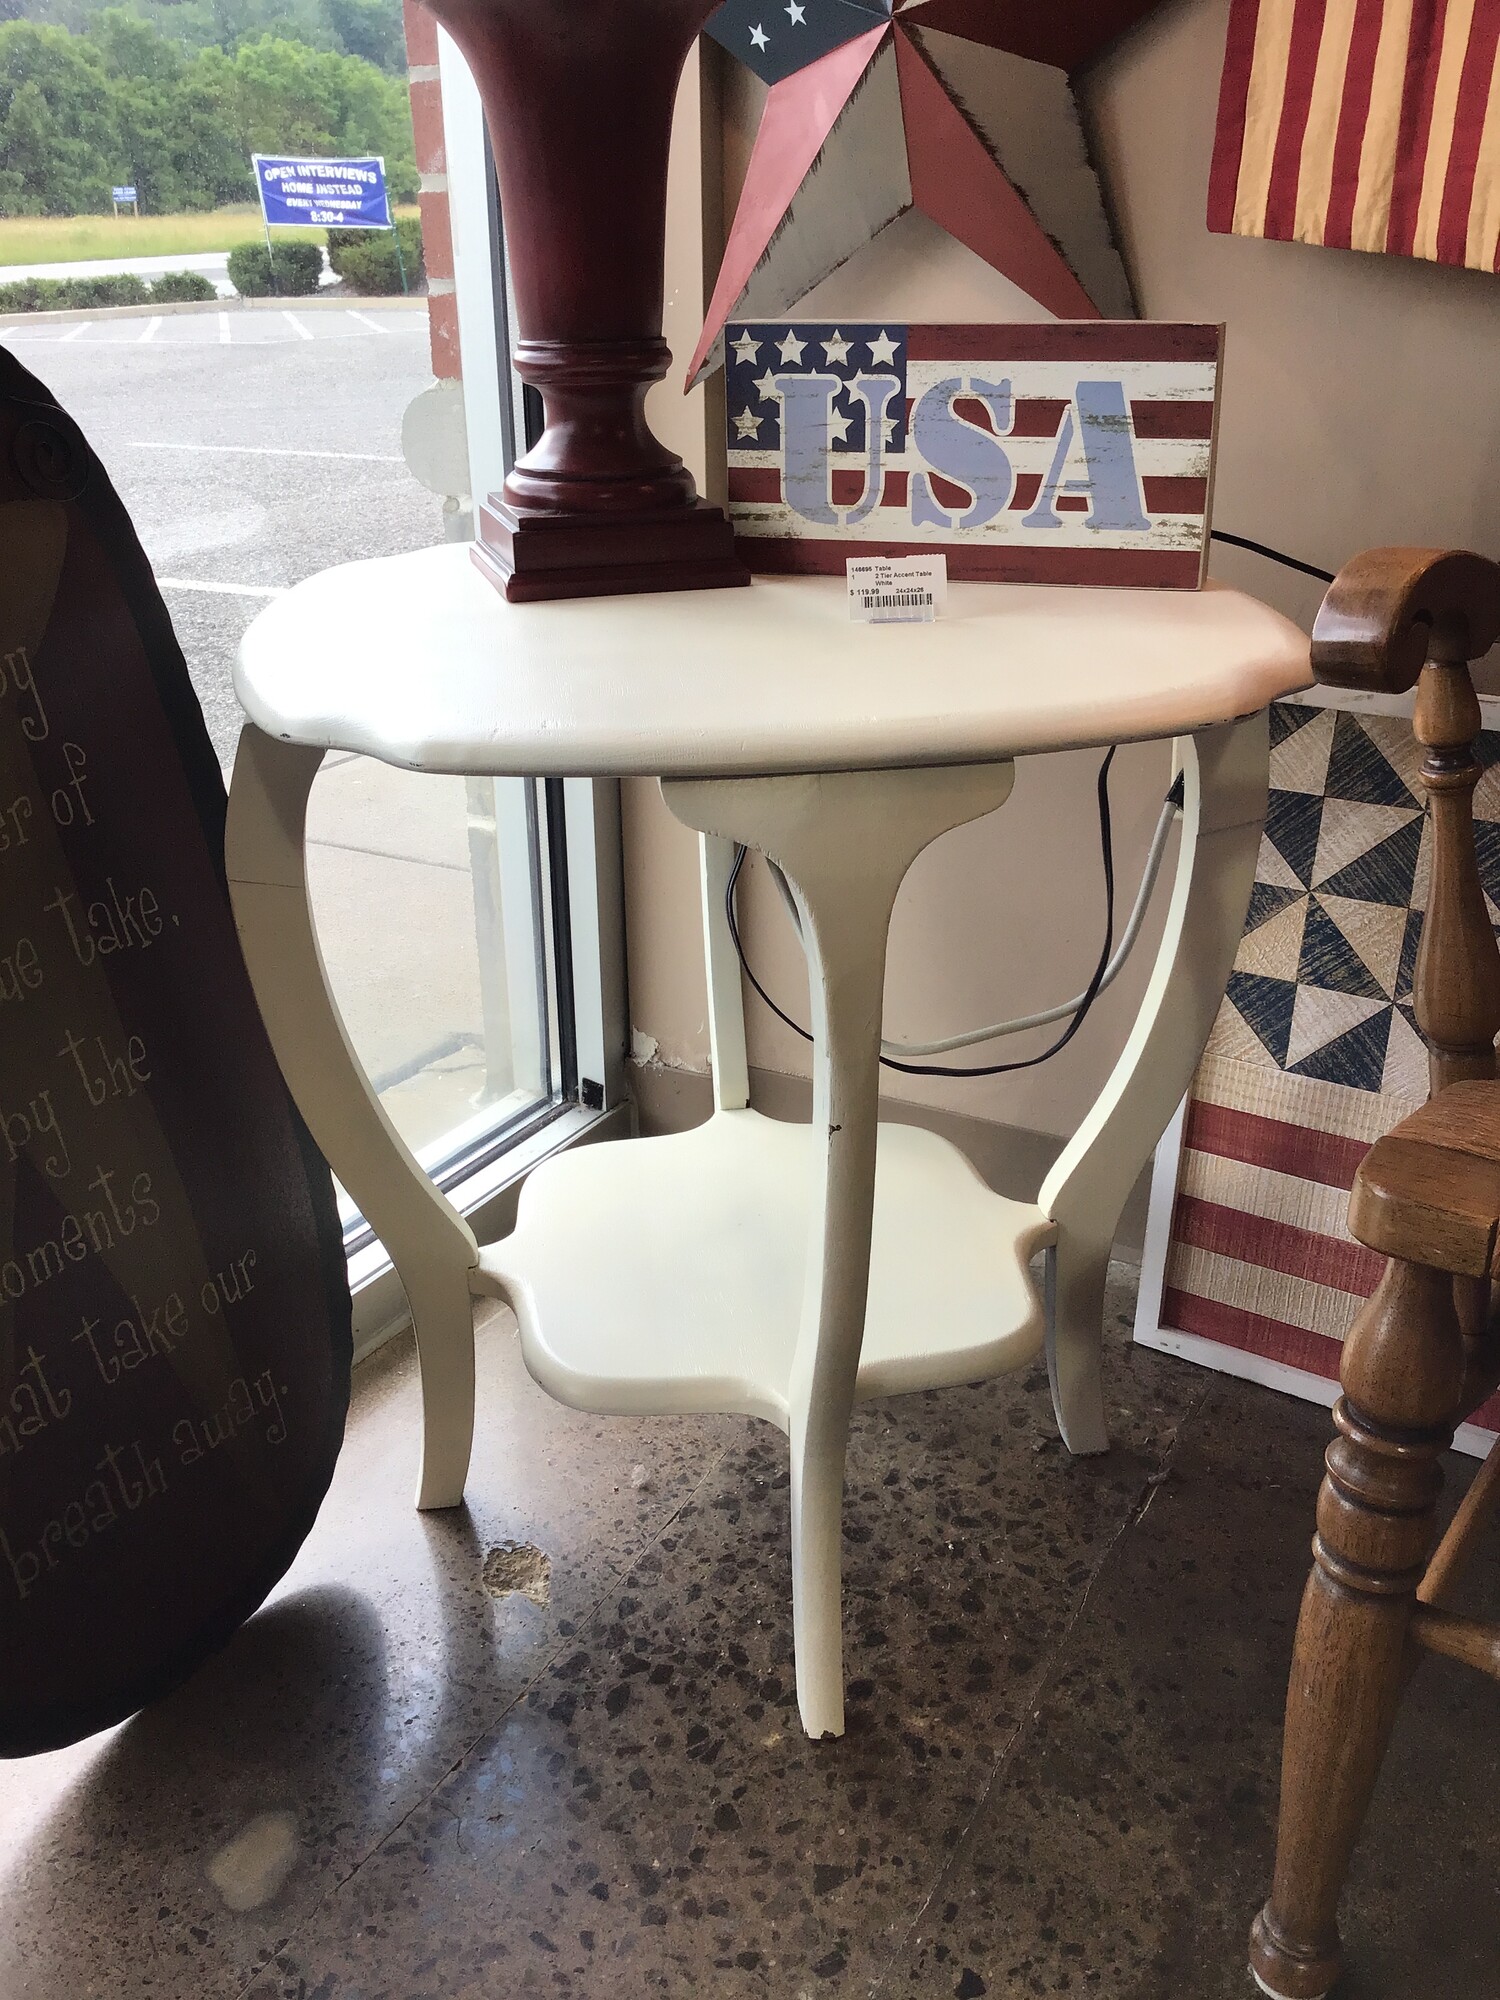 This vintage accent table was painted white. It features scalloped edges and a lower shelf.
Dimensions are 24 in x 24 in x 26 in